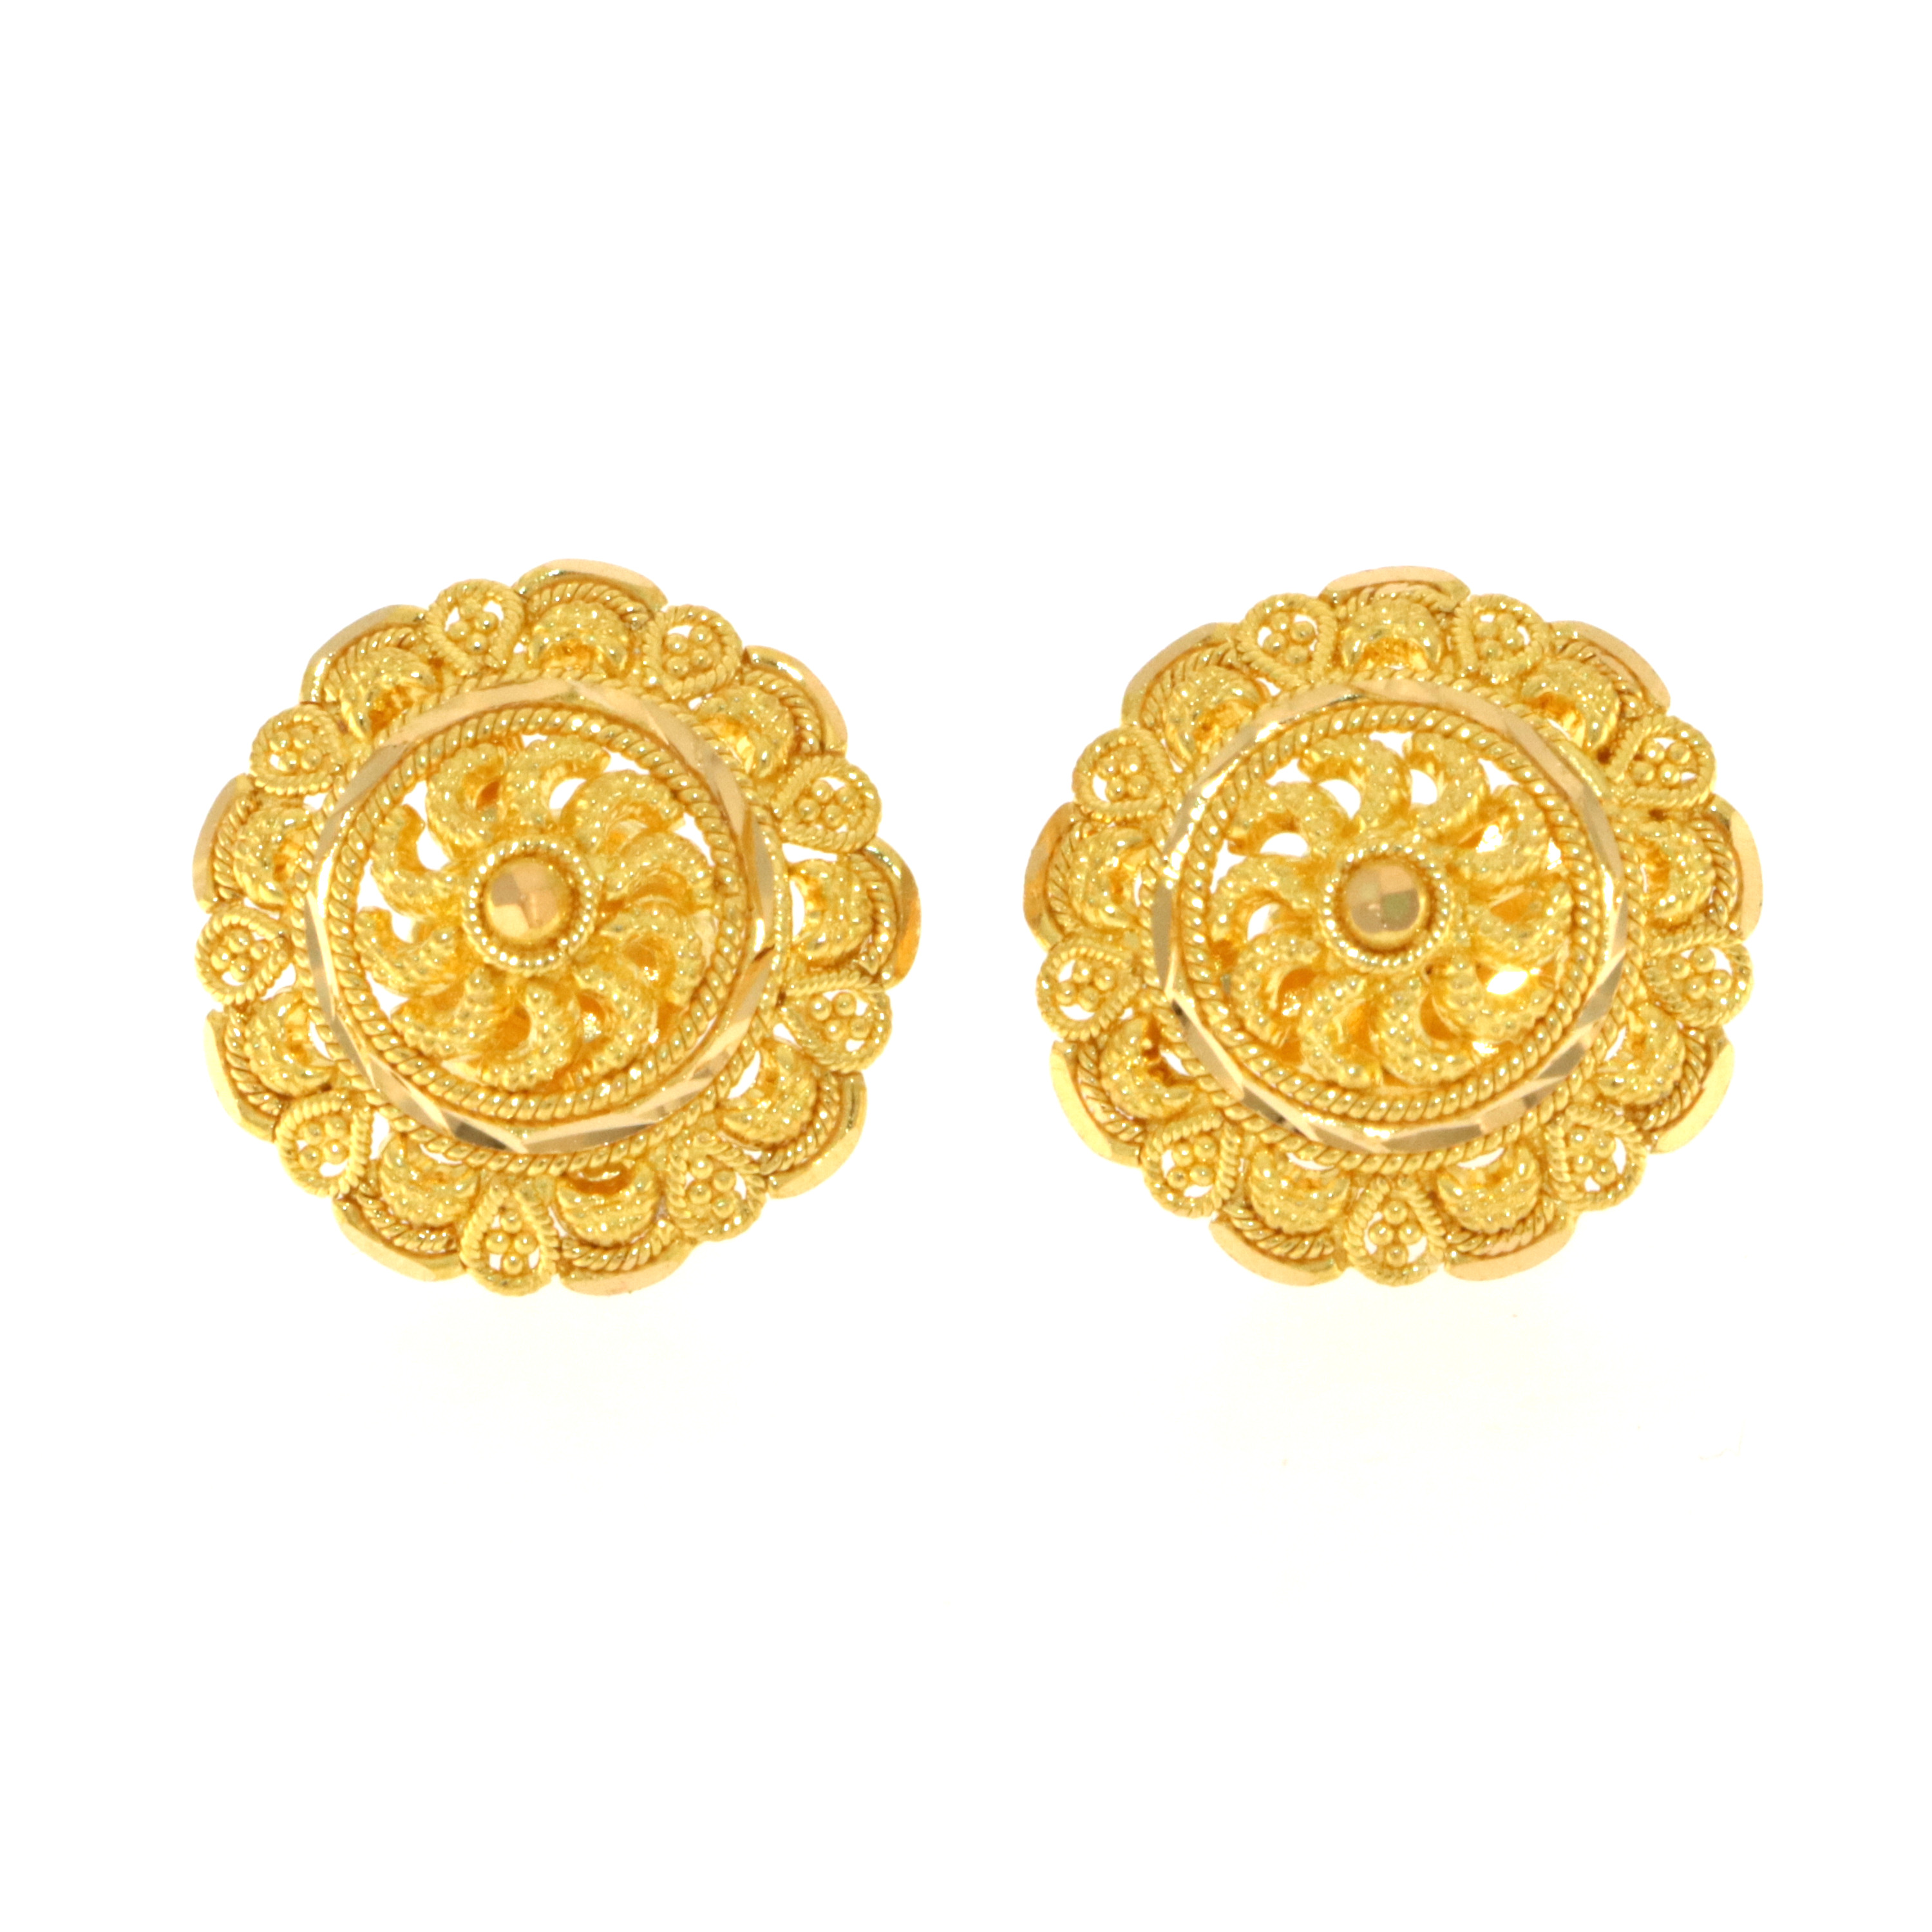 22ct Real Gold Asian/Indian/Pakistani Style Filigree Stud Earrings